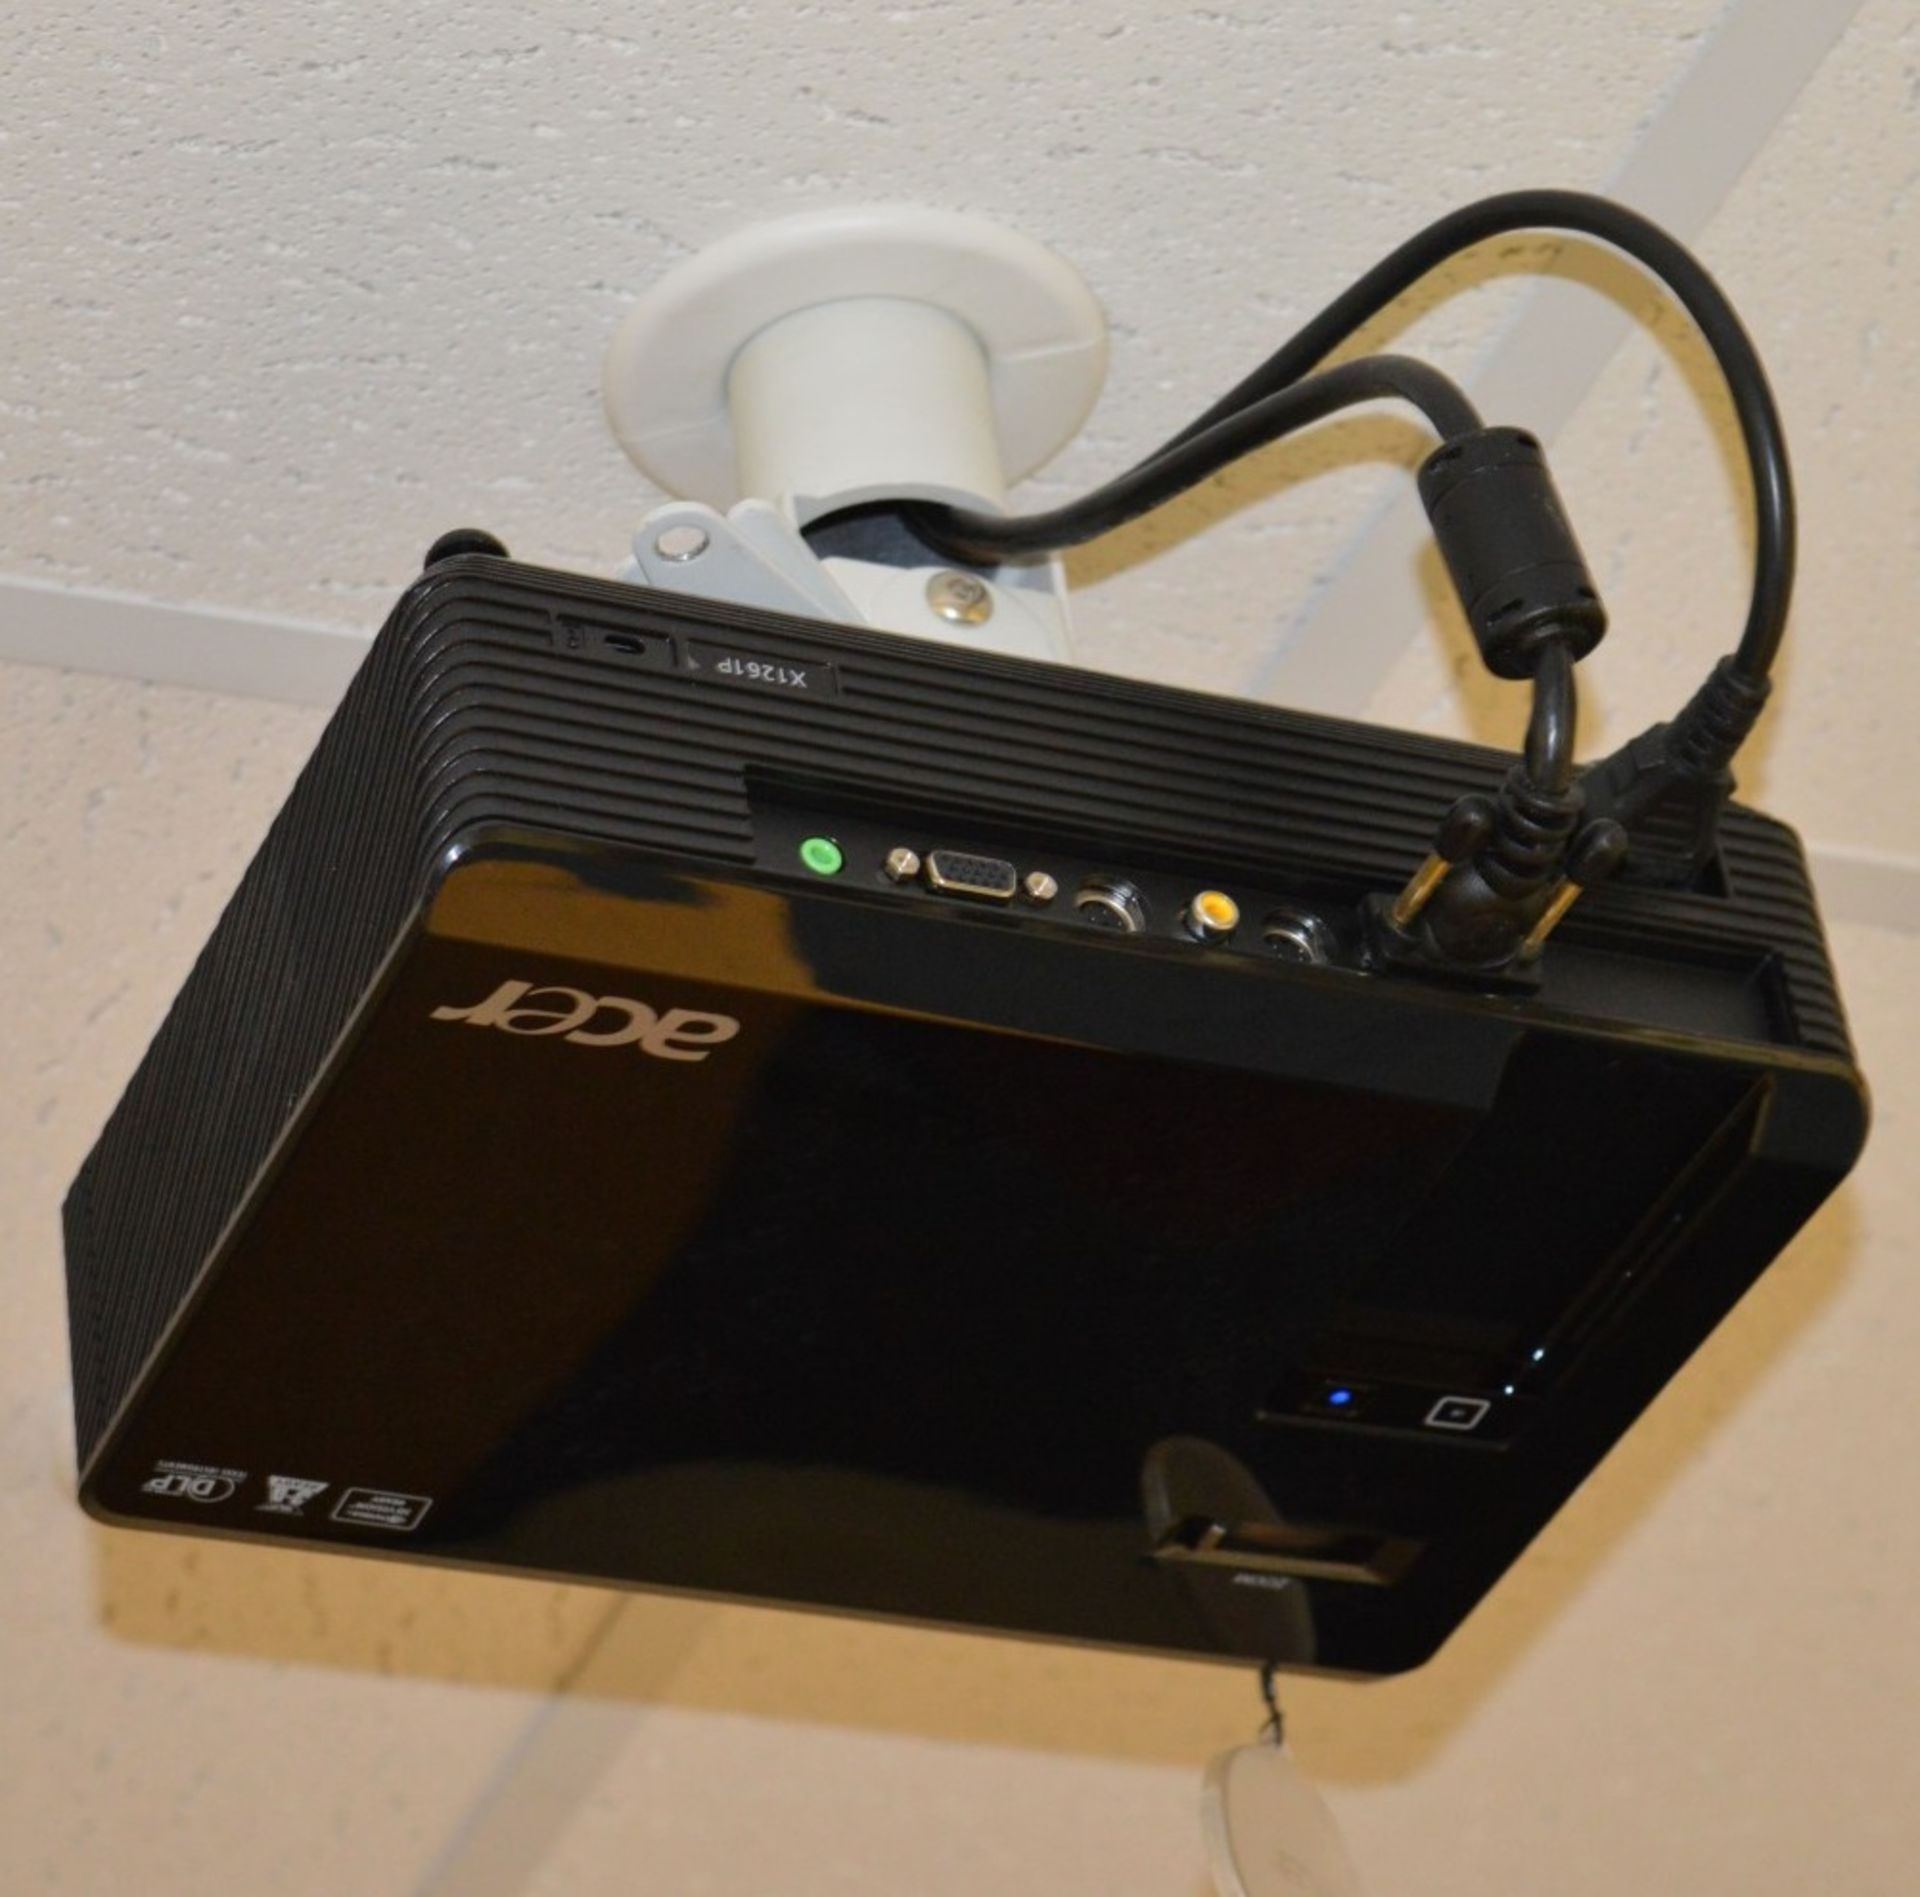 1 x Acer X1261 DLP Projector With Ceiling Bracket and Remote Control - CL300 - Ref S110 - - Image 3 of 10